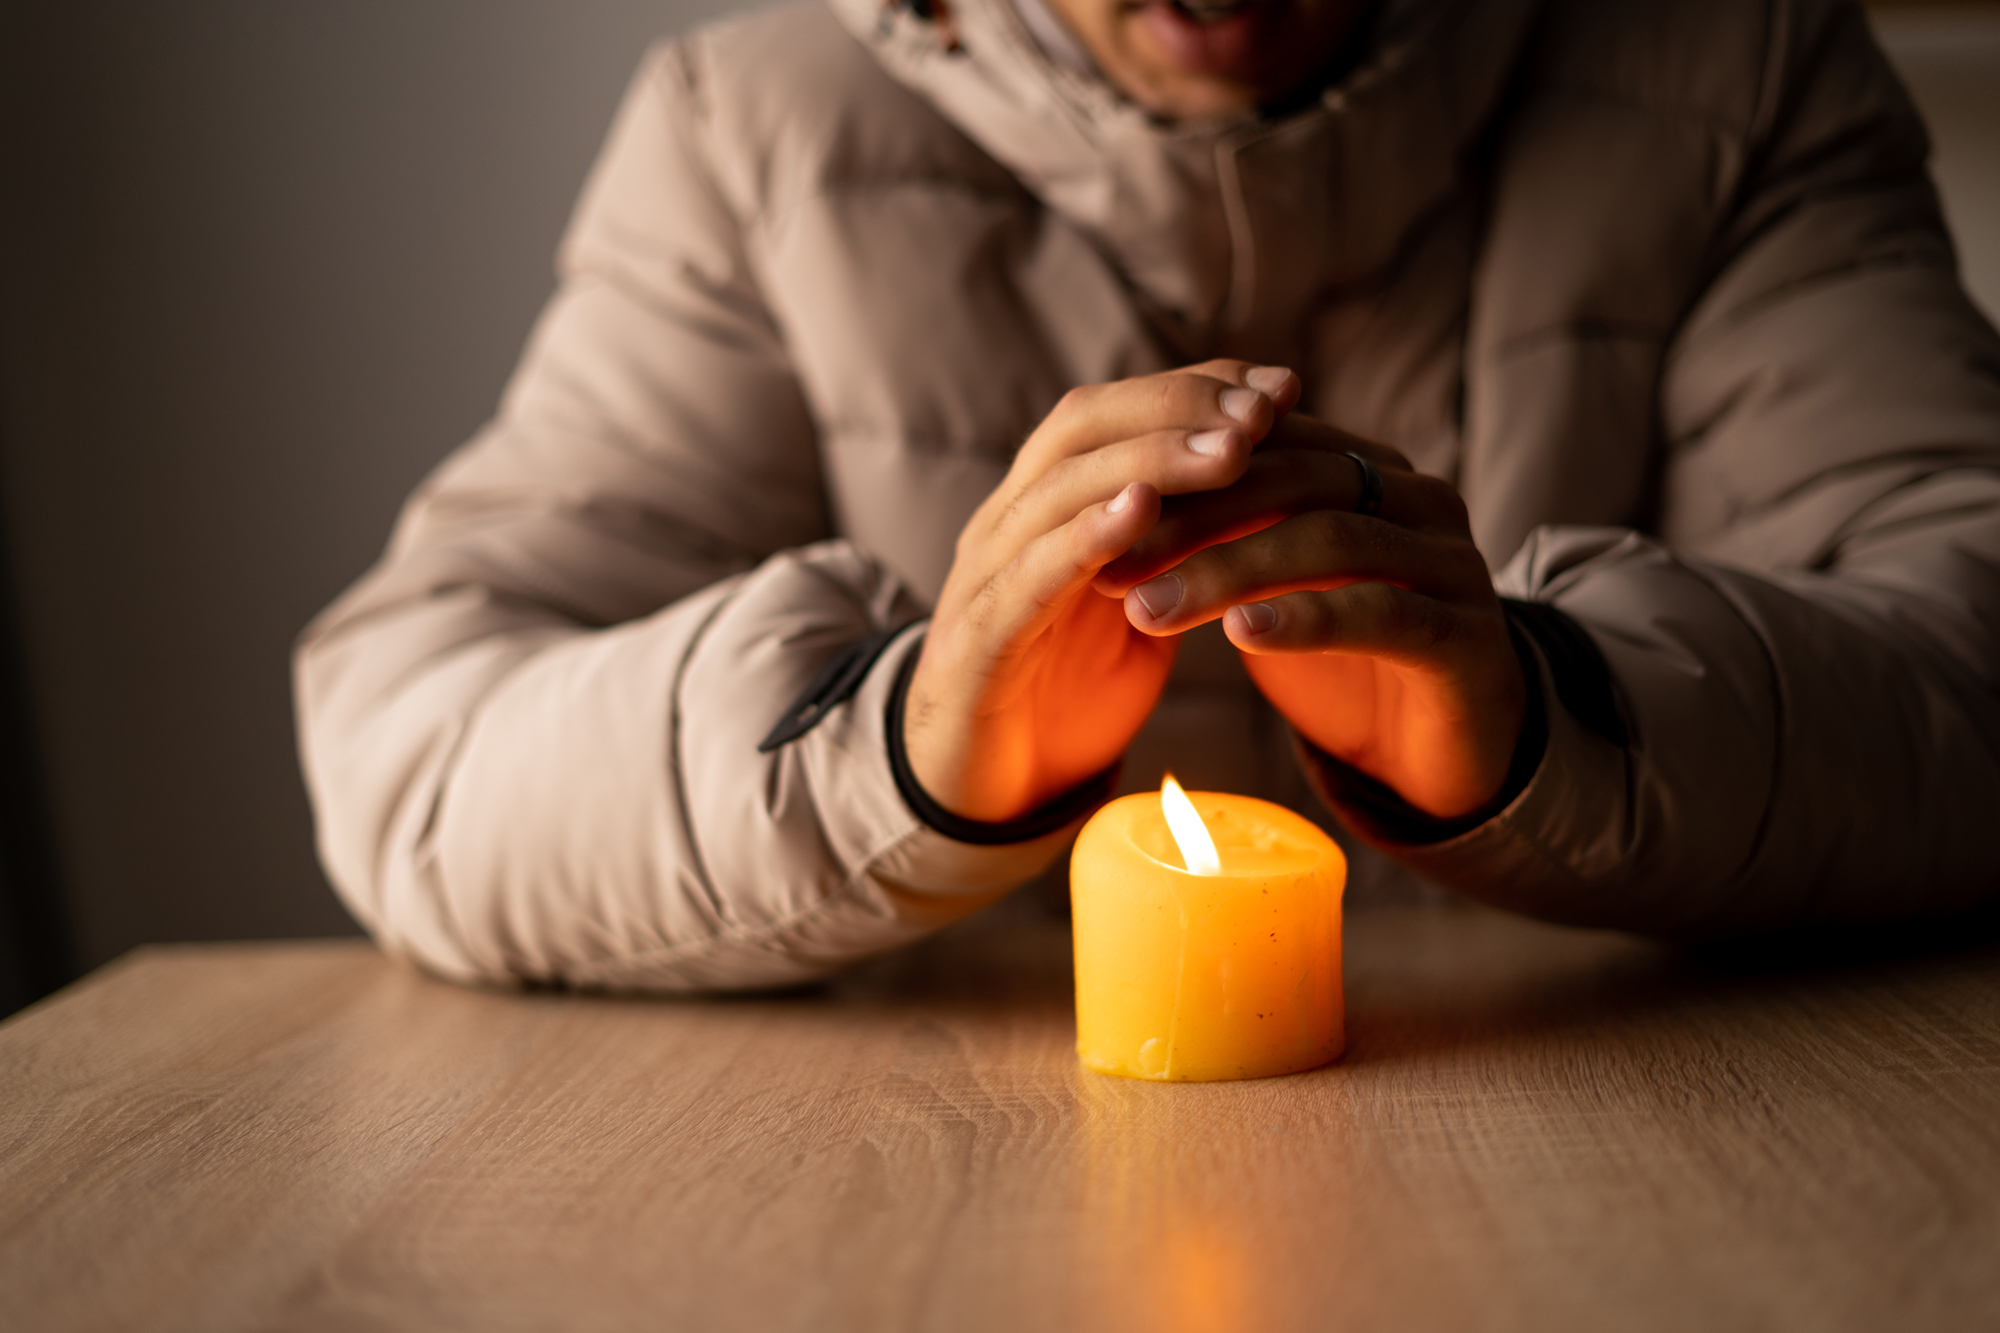 Warming hands over candle